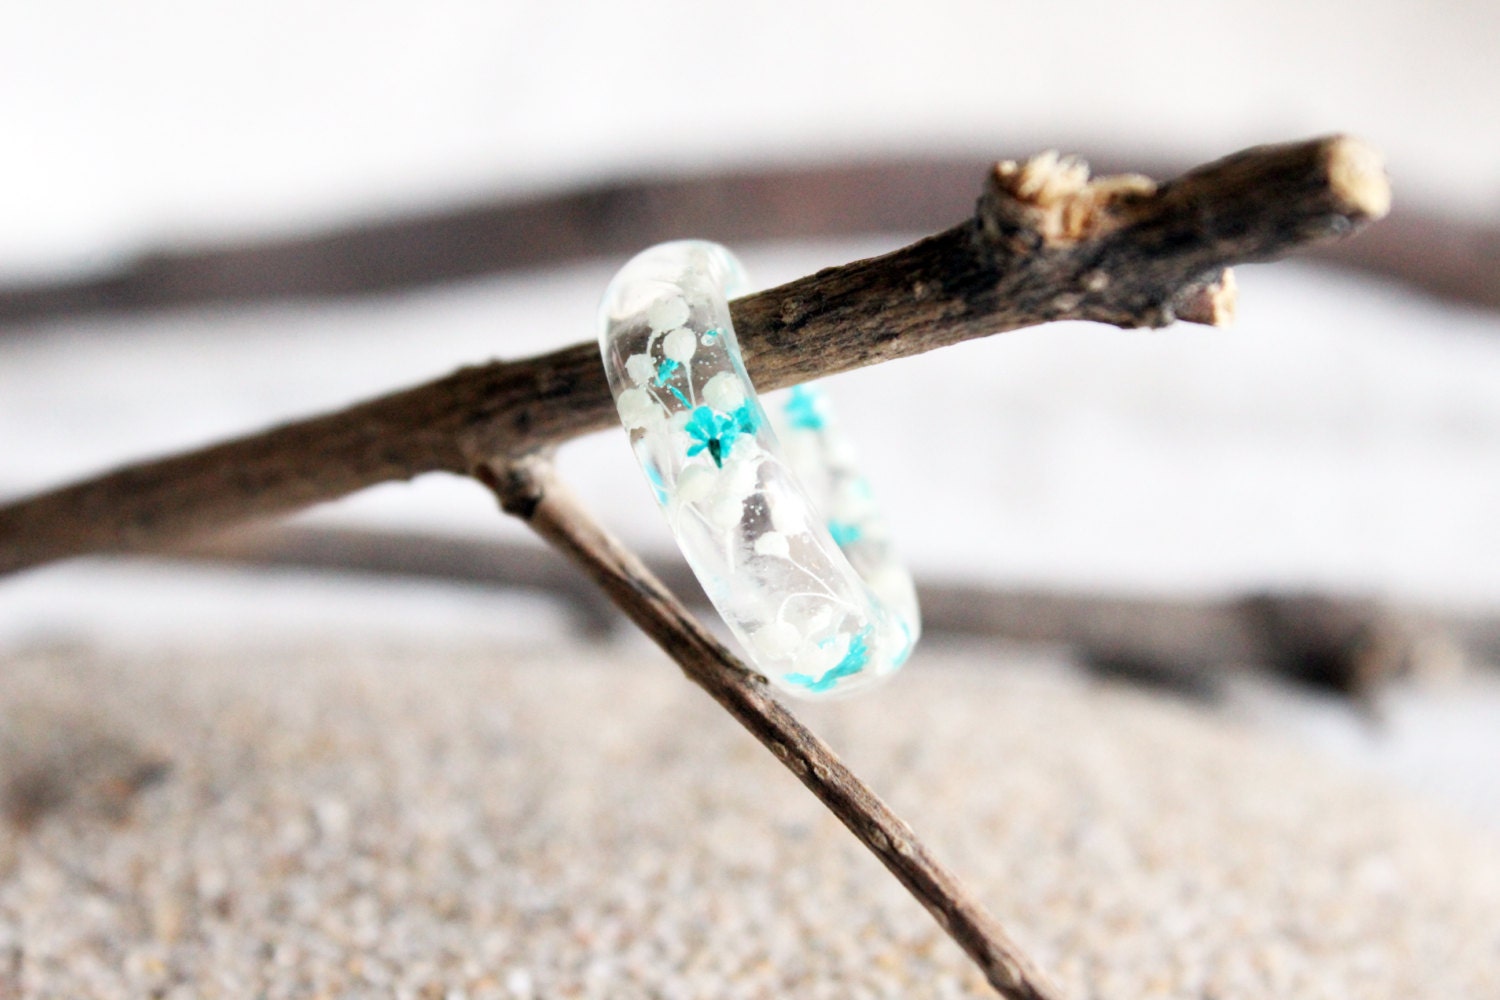 Queen Anne's Lace and Stardust Flower Ring, Resin Ring, Turquoise Ring, Resin Jewelry, Nature Jewelry, Flower Jewelry, Minimalist Jewelry